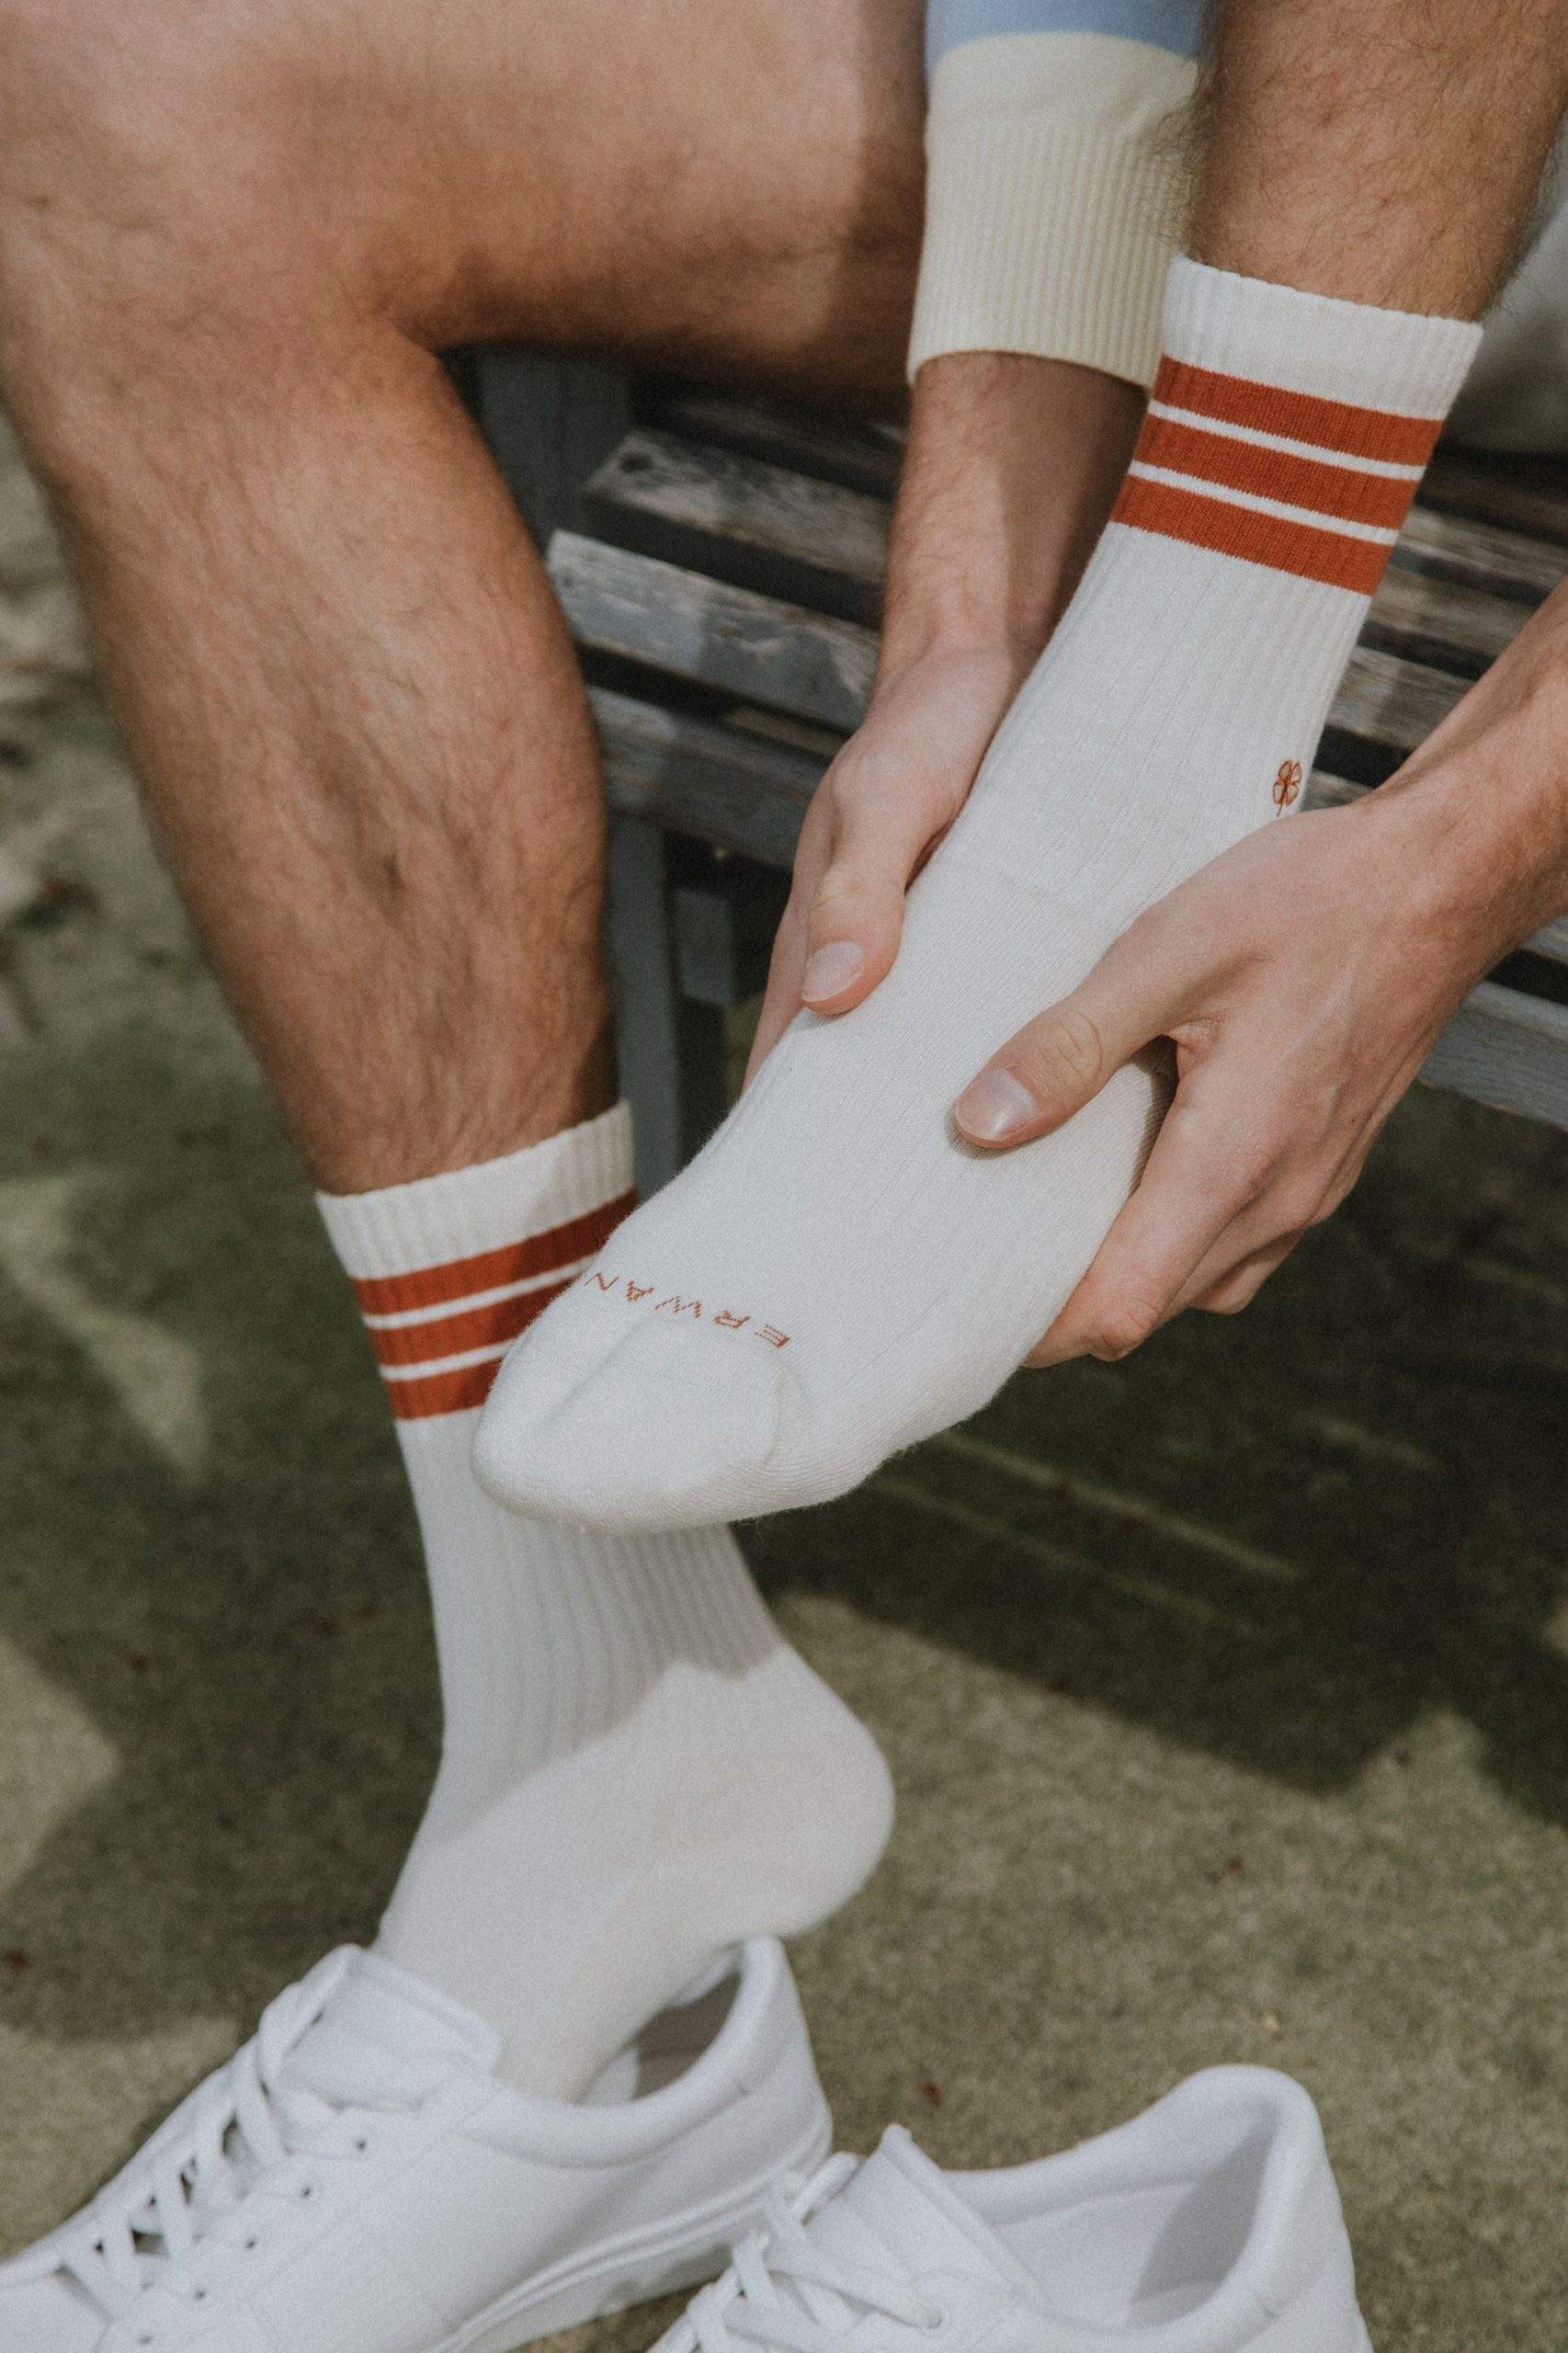 UK man earns 1.5 lakhs per month by selling his used sweaty socks online